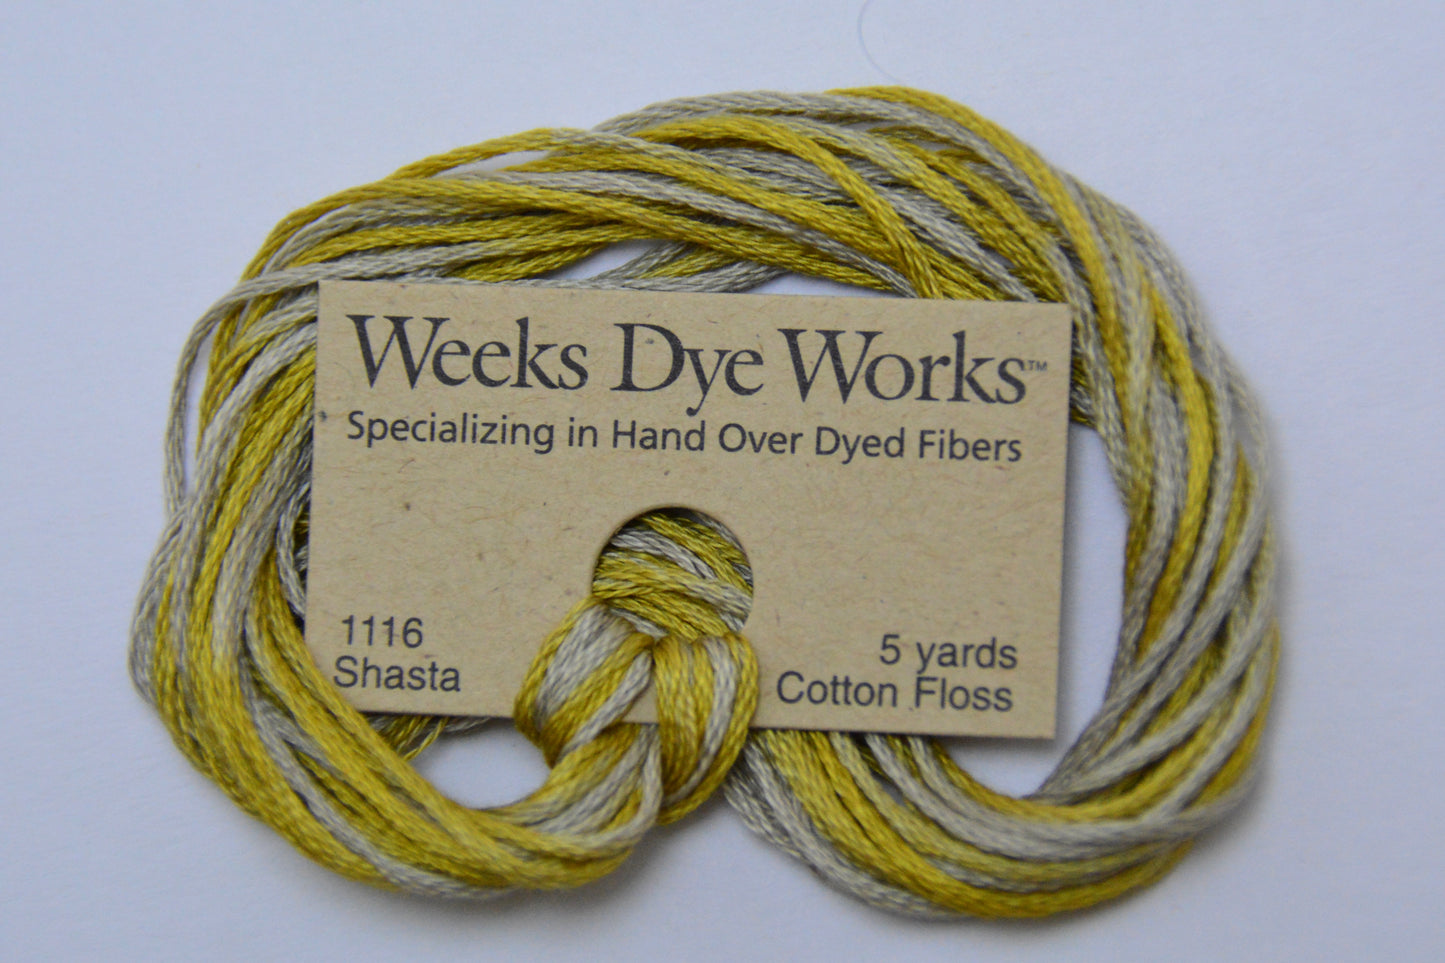 Shasta 1116 Weeks Dye Works 6-Strand Hand-Dyed Embroidery Floss